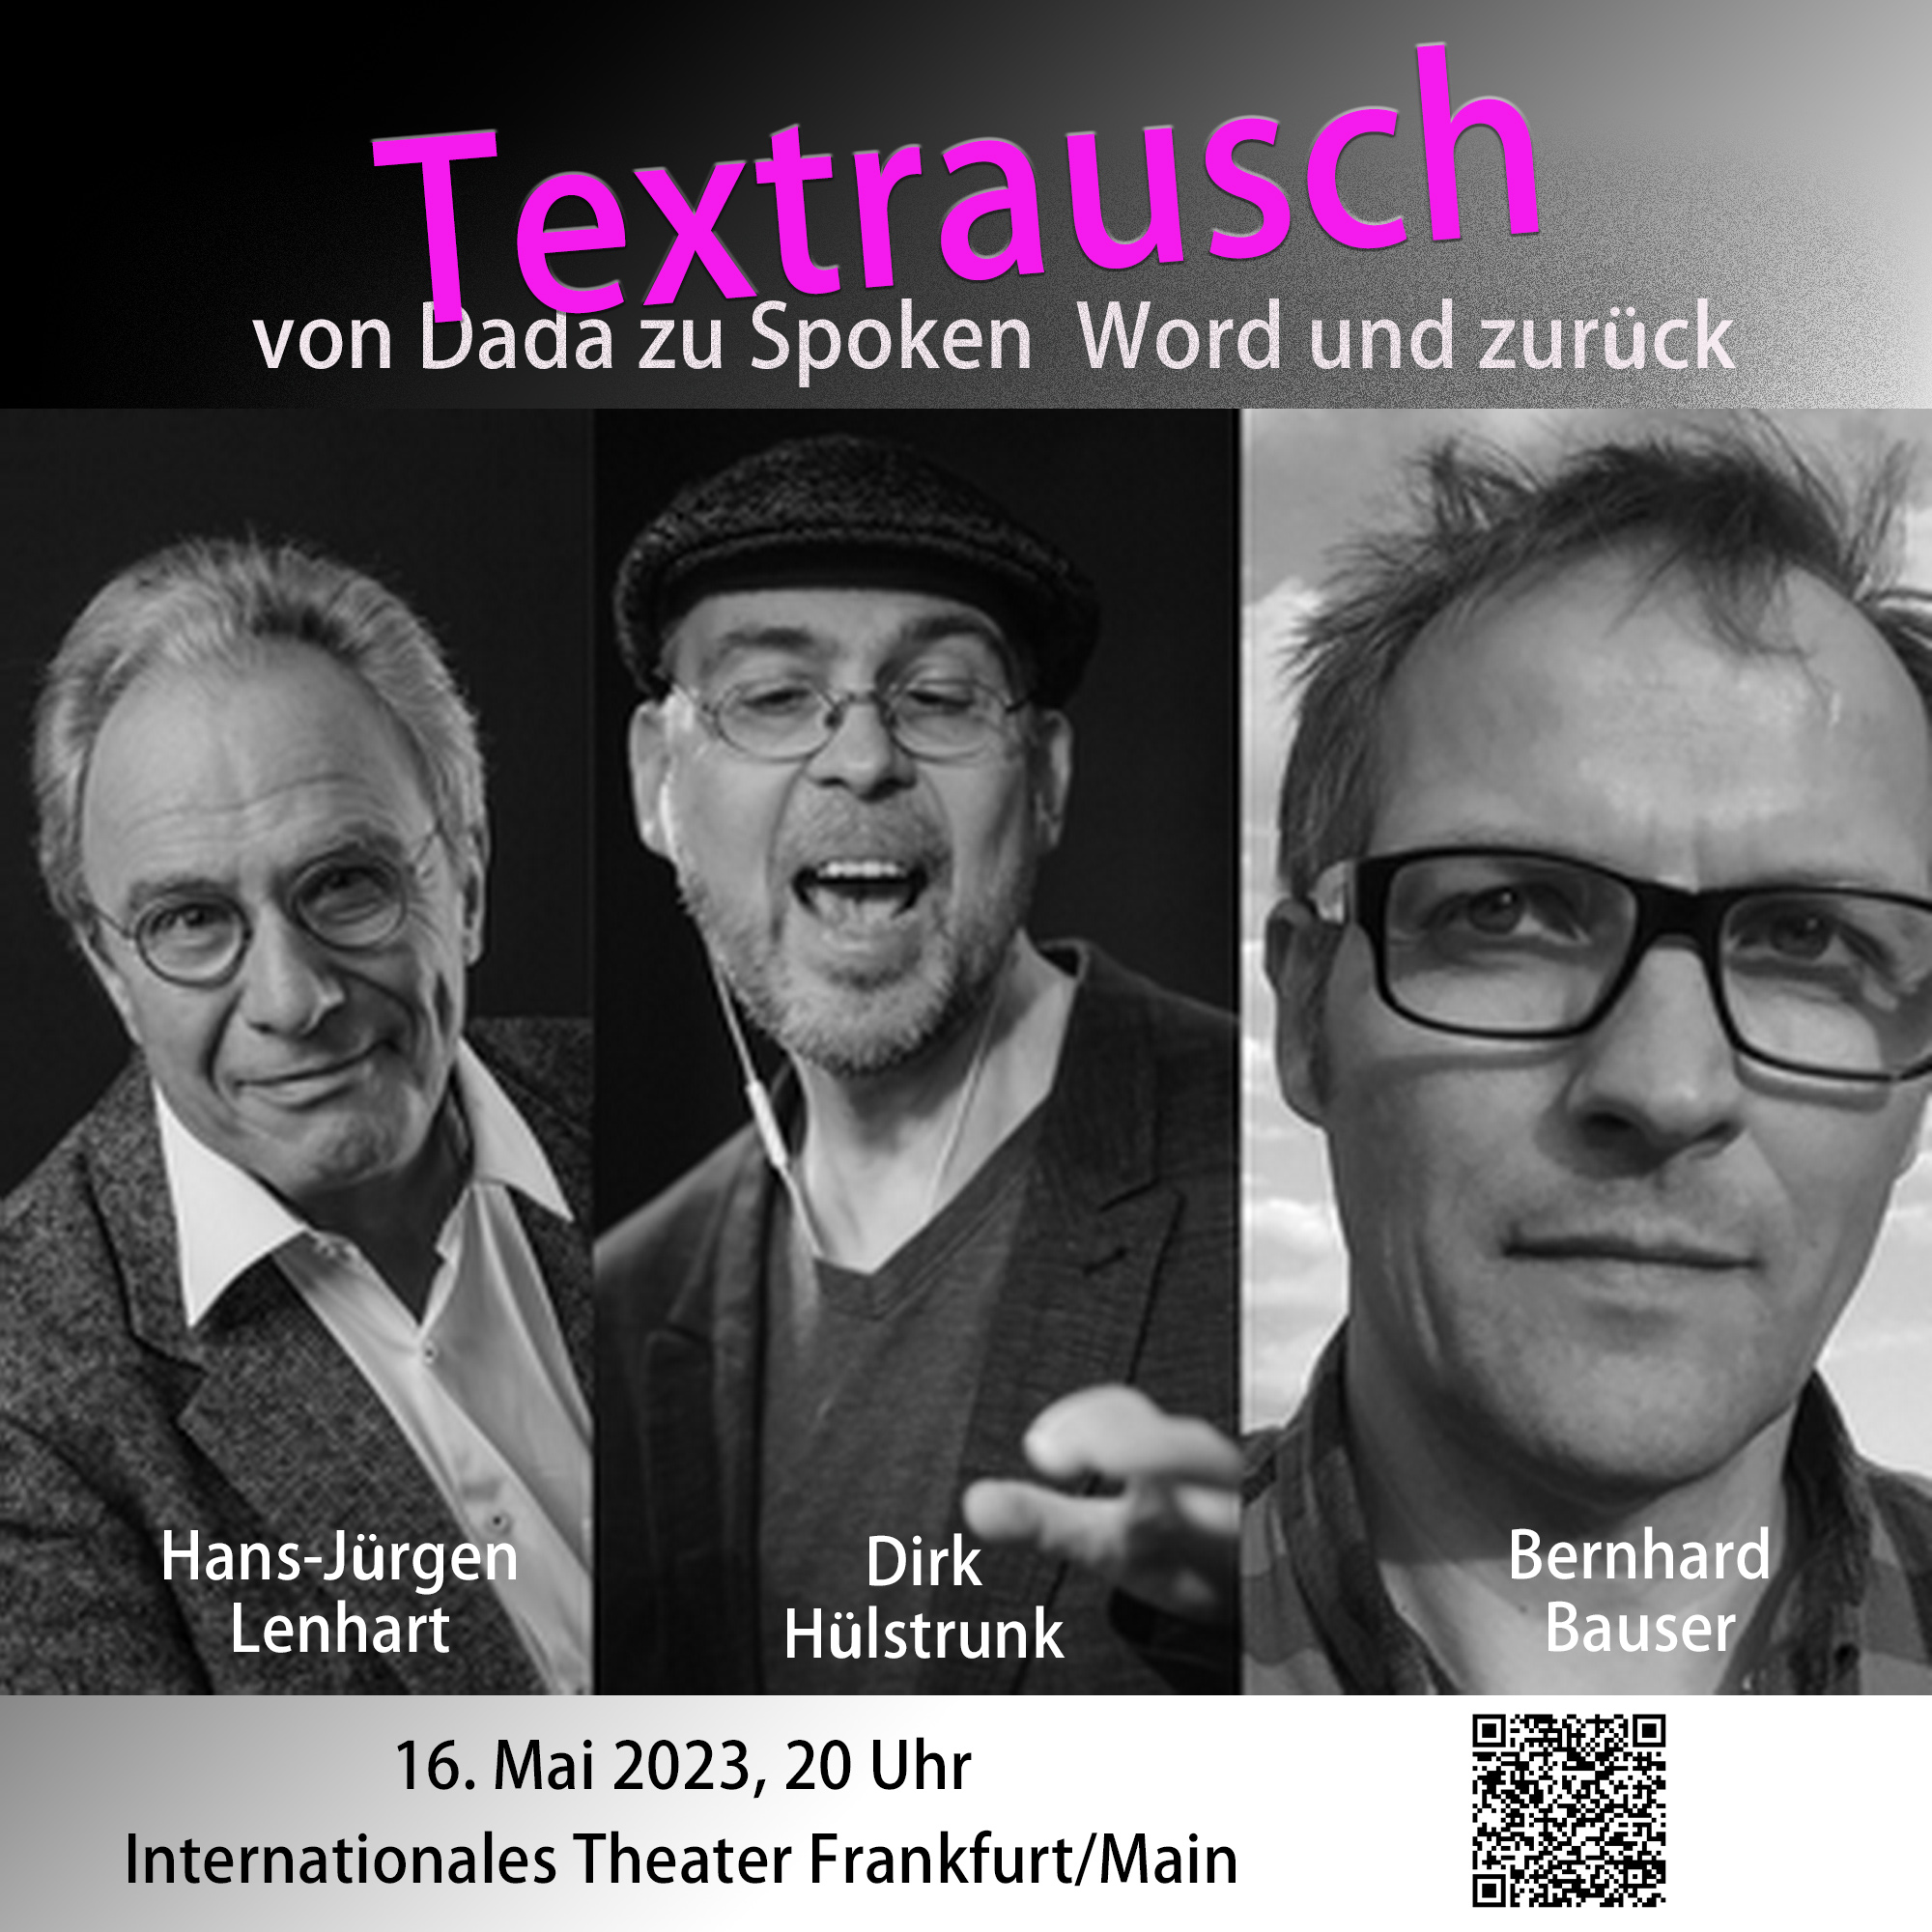 Textrausch – From DADA to Spoken Word, May 12th, 2023